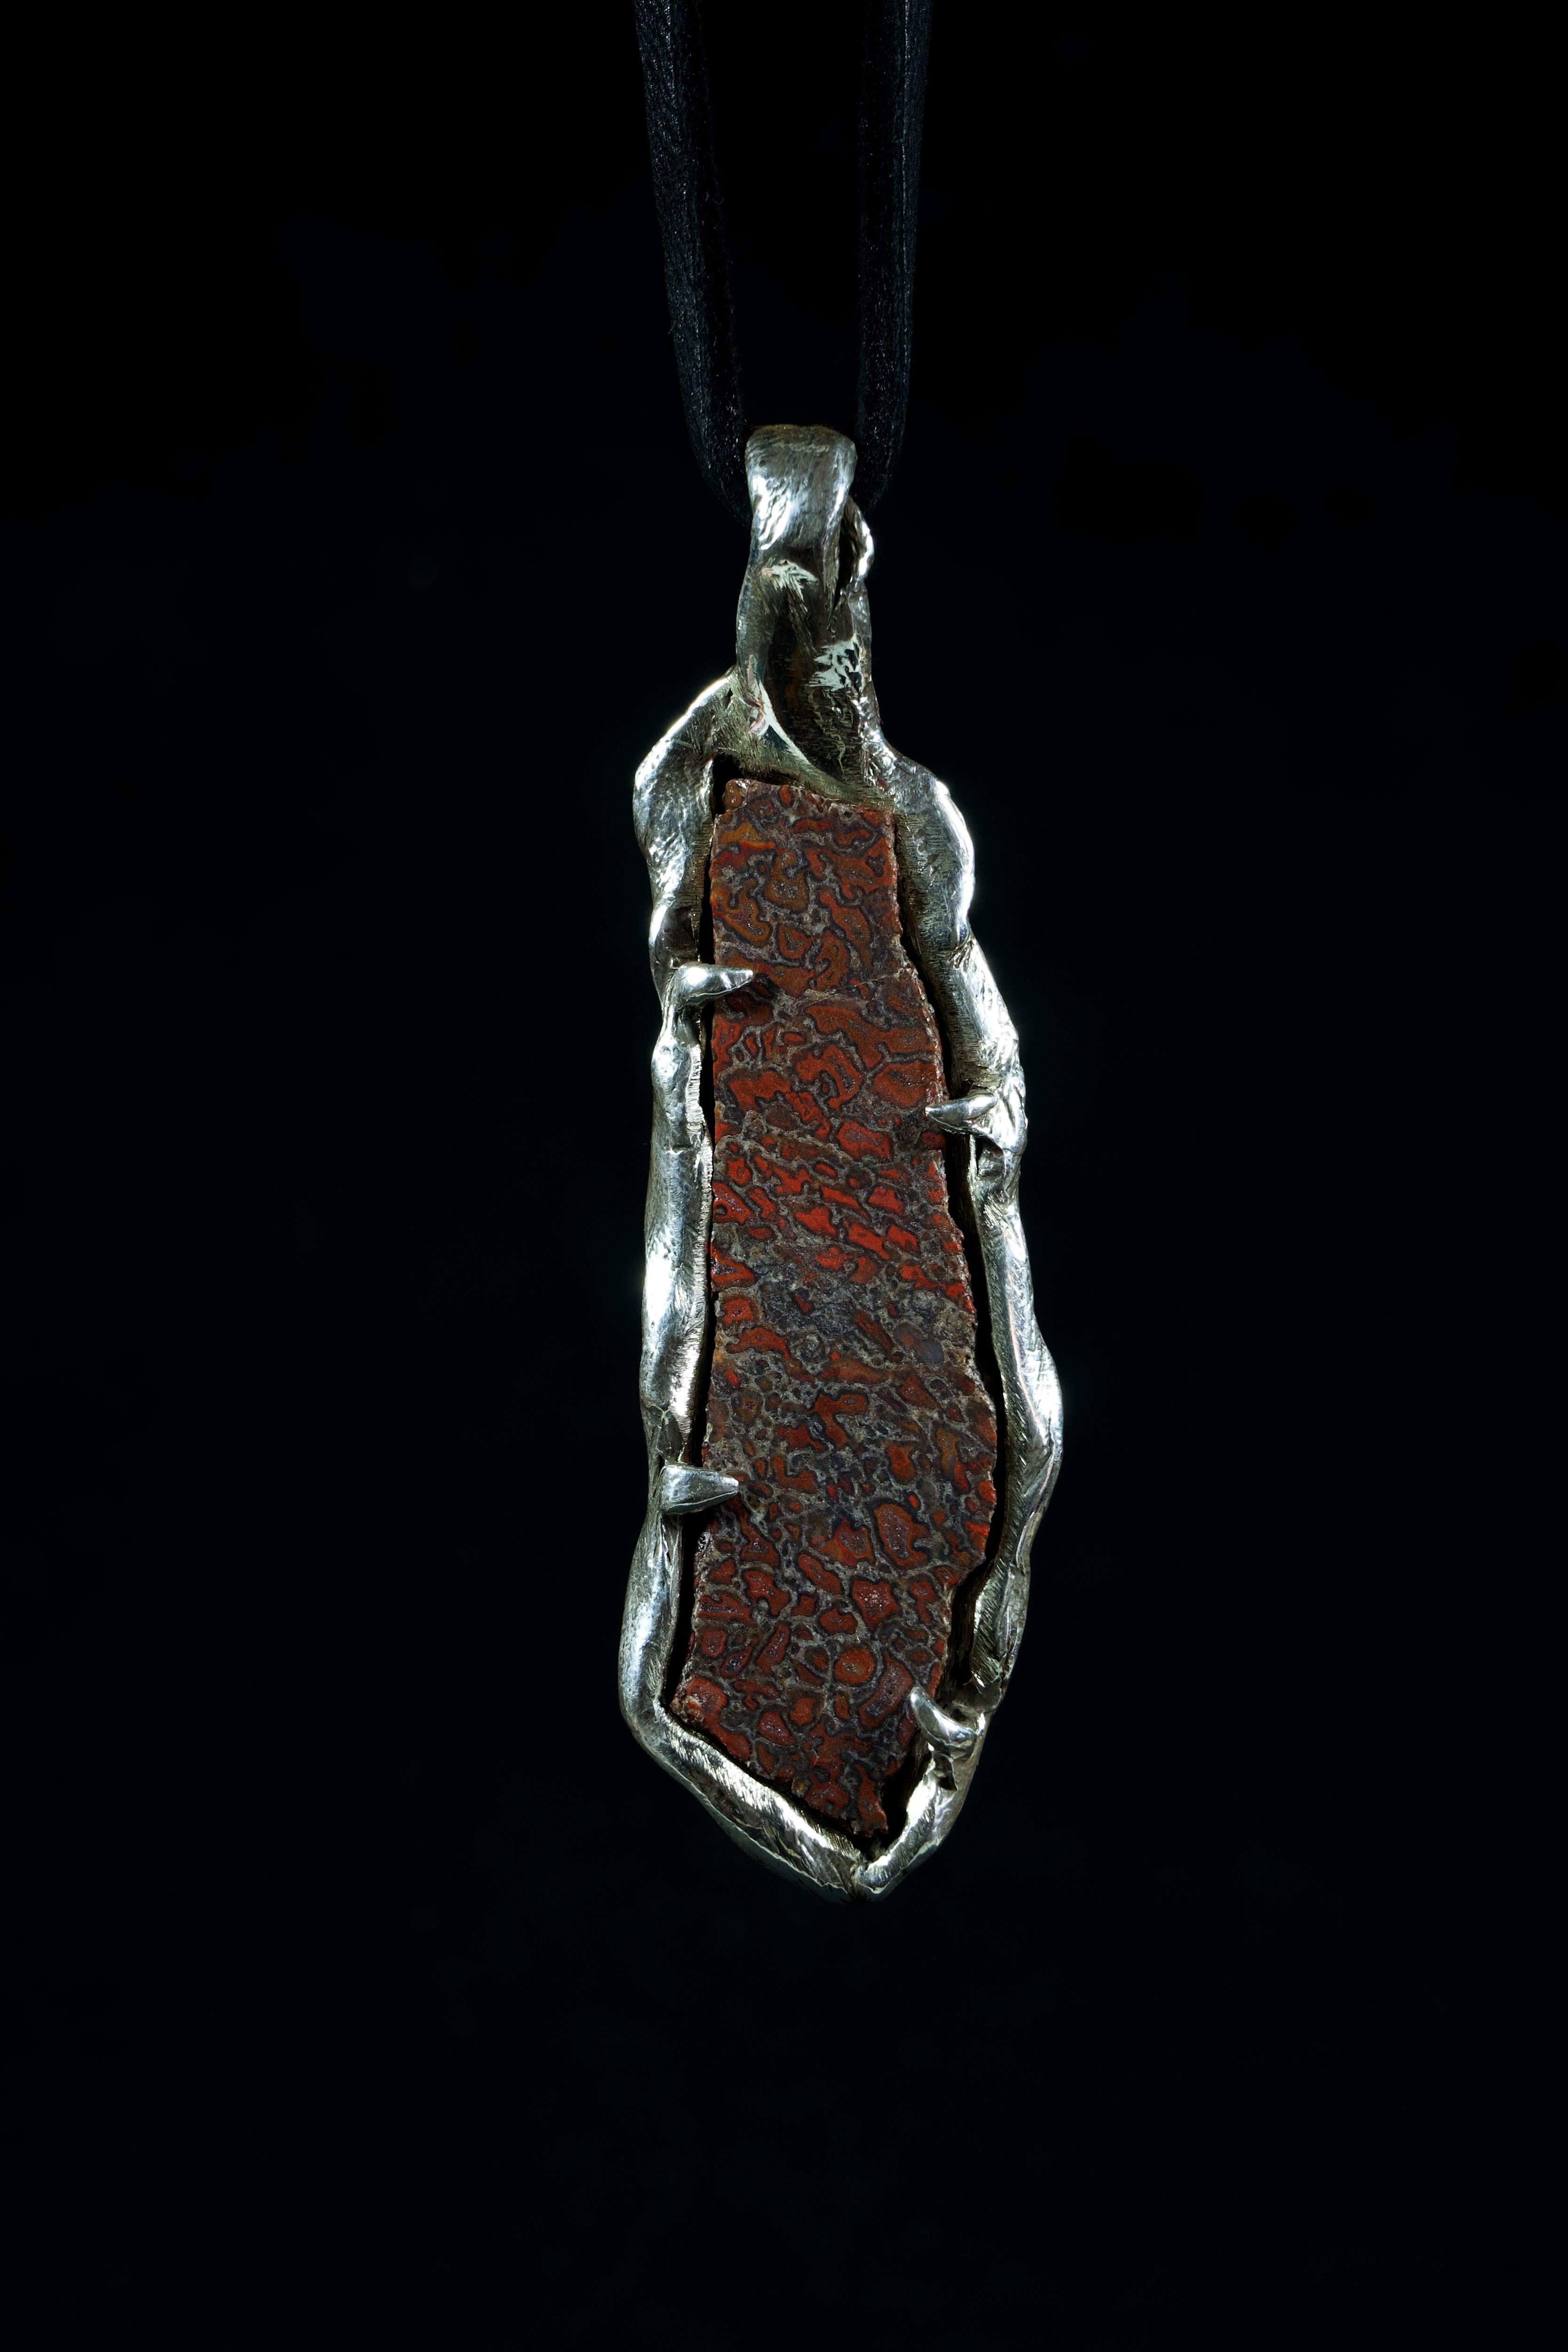 The agatized dinosaur bone used in this pendant is a unique and rare piece of history and has beautiful and intricate patterns that have been formed over millions of years through fossilization. The detailed design of the pendant is inspired by the